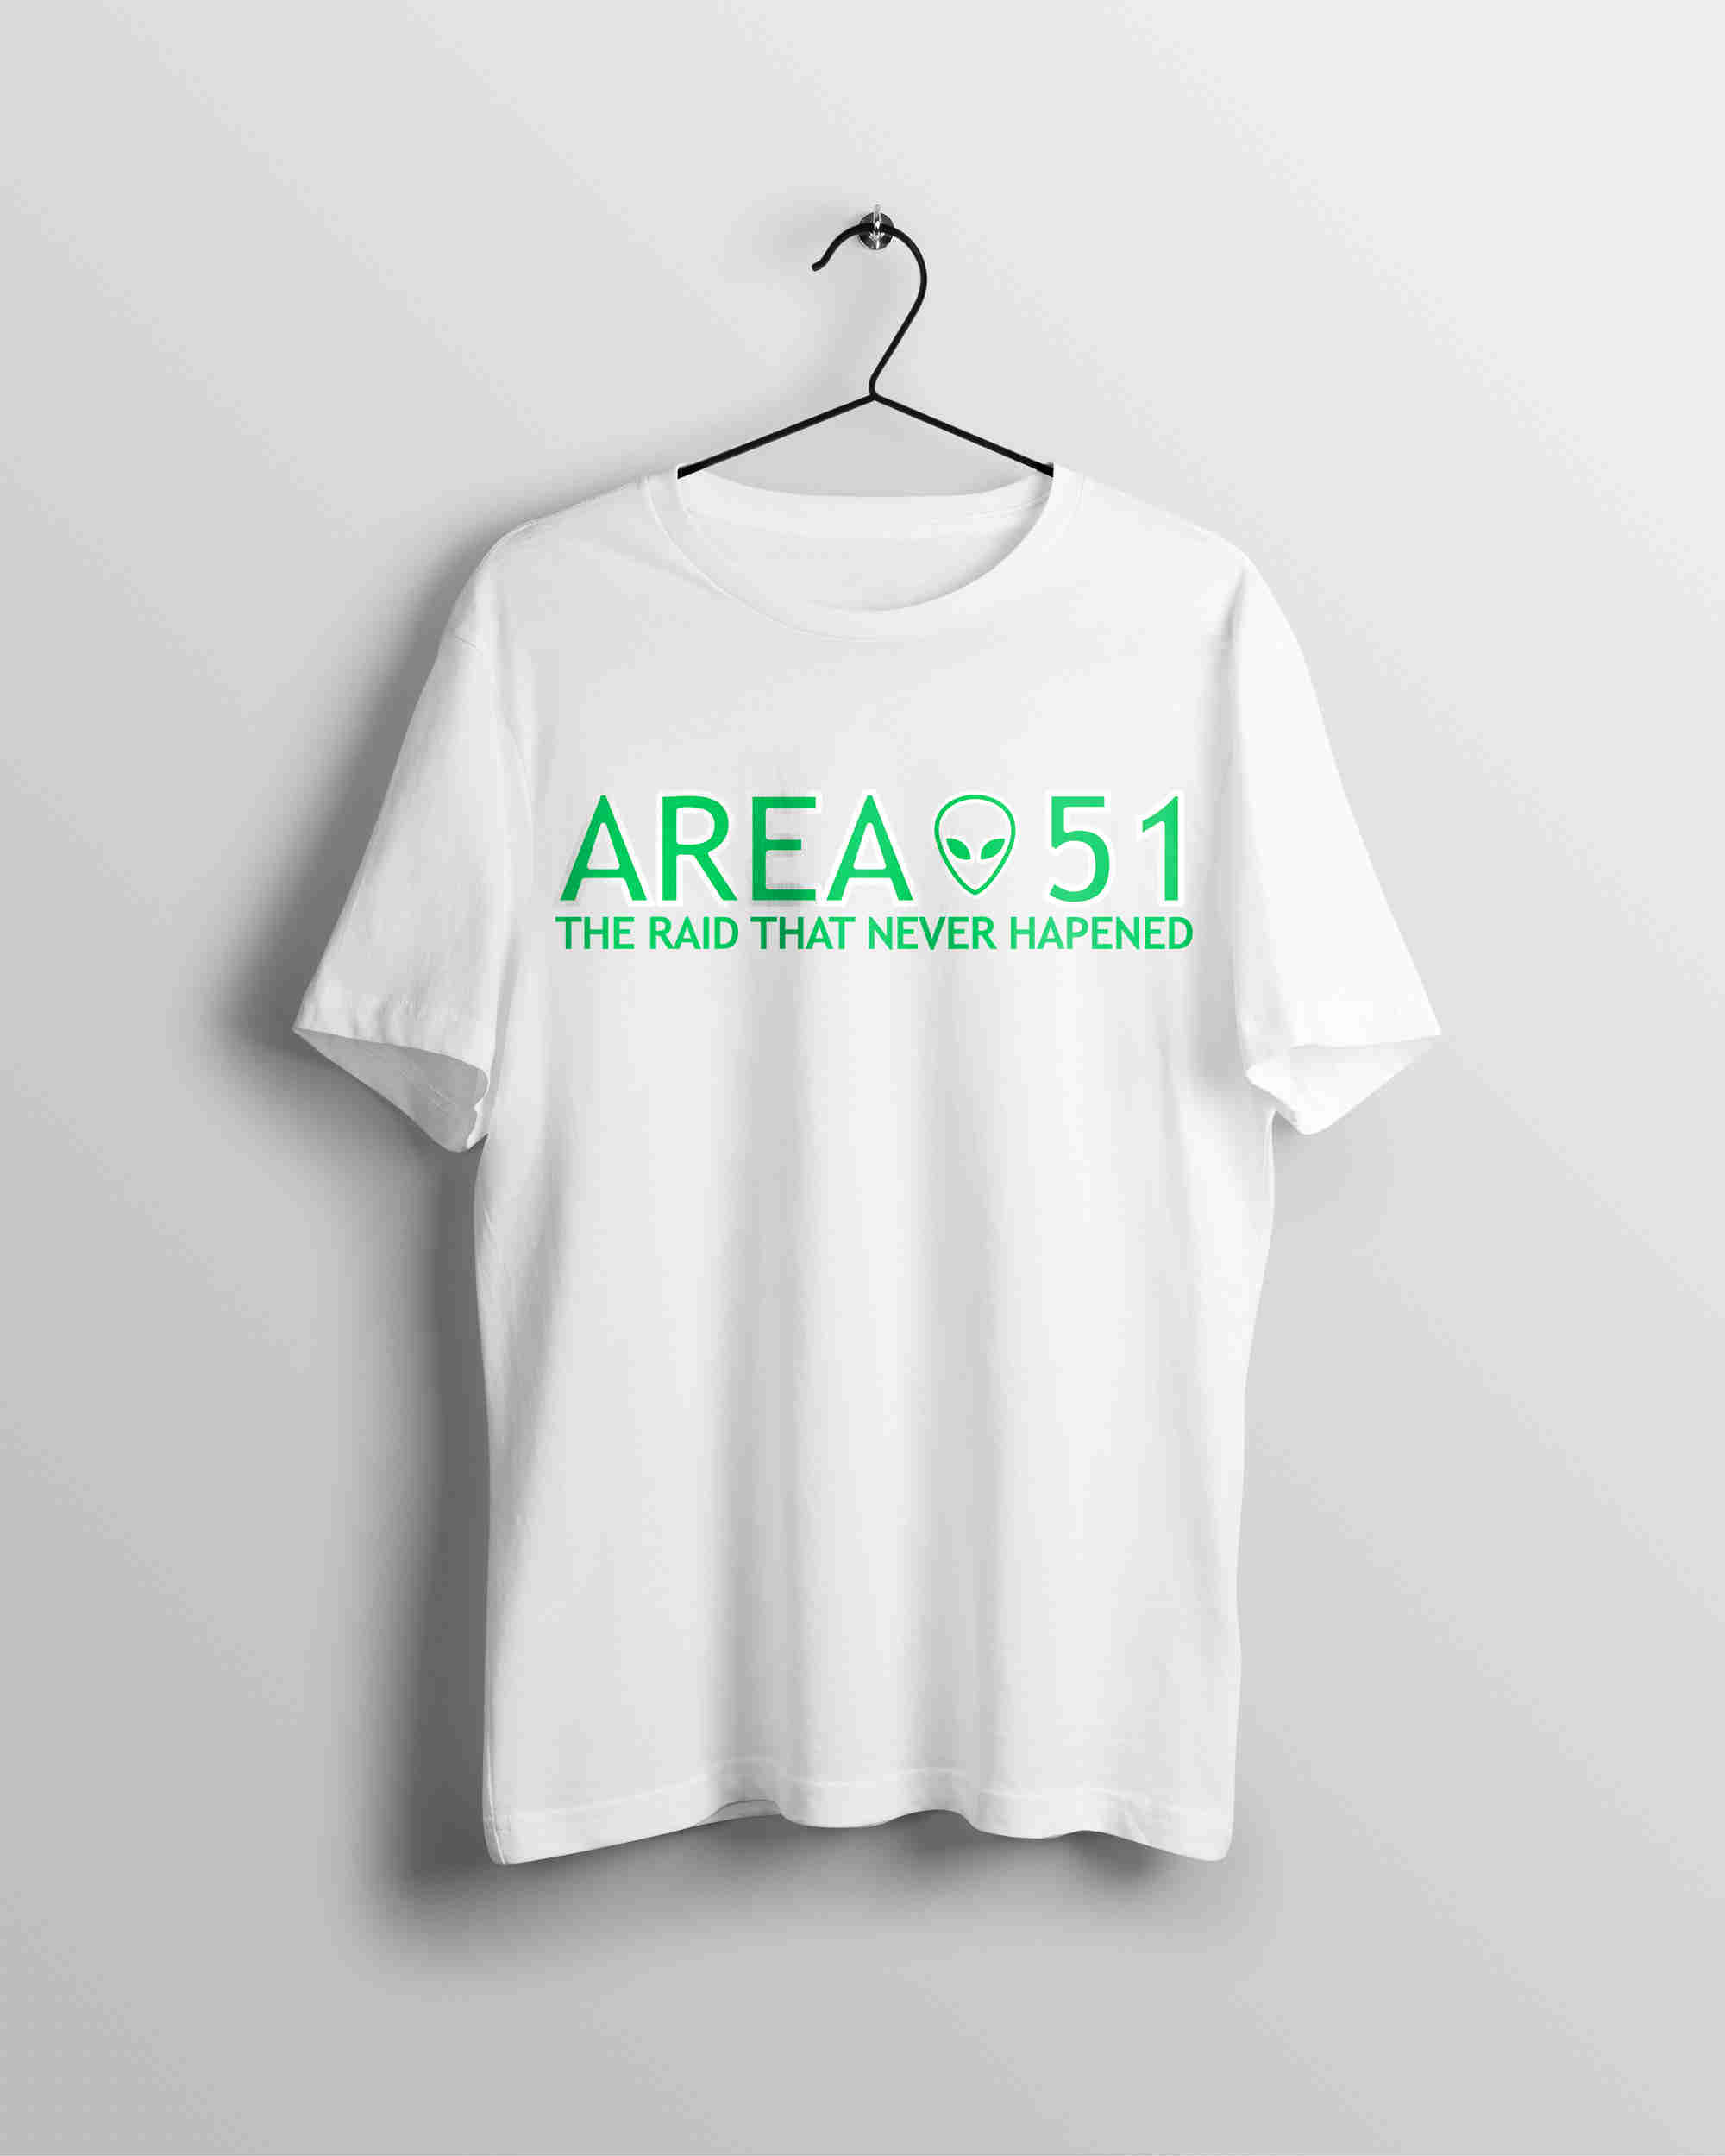 gucci t shirt - Area 51 The Raid That Never Hapened